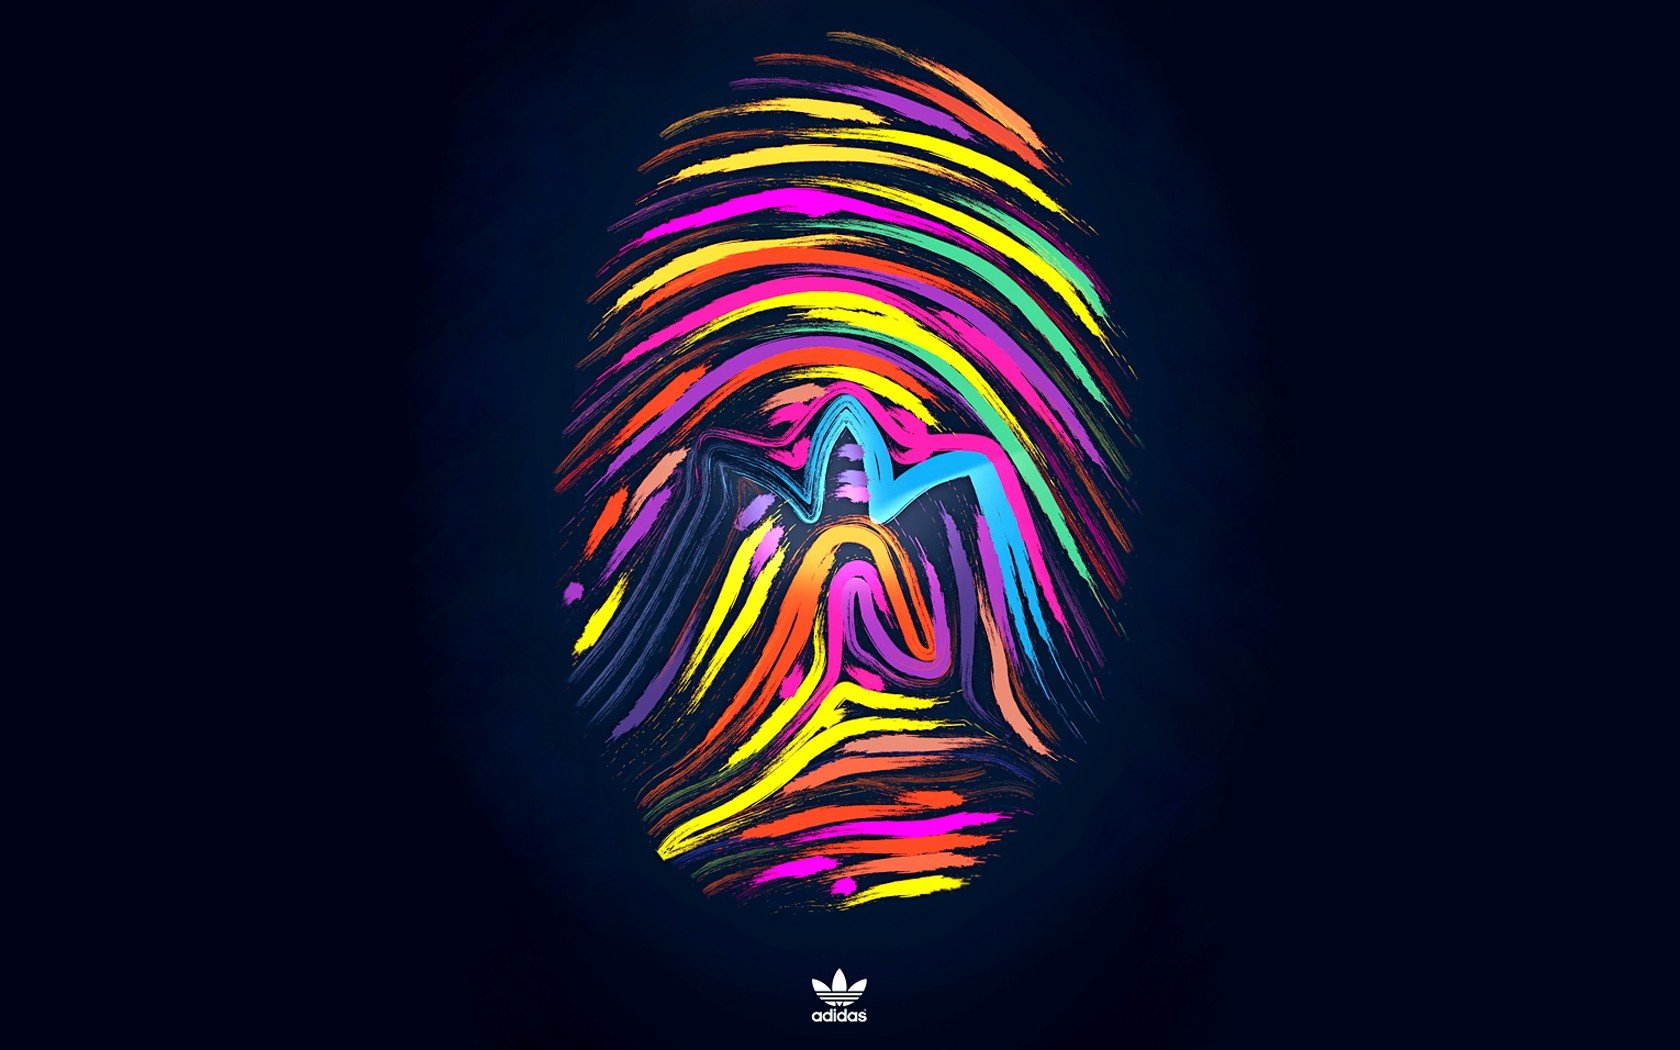 Free download Adidas Wallpaper For iPhone 5 Adidas wallpaper for iphone 5 [1680x1050] for your Desktop, Mobile & Tablet. Explore Adidas iPhone Wallpaper. Adidas Logo Wallpaper, Adidas Wallpaper 1920 x Cool Adidas Wallpaper